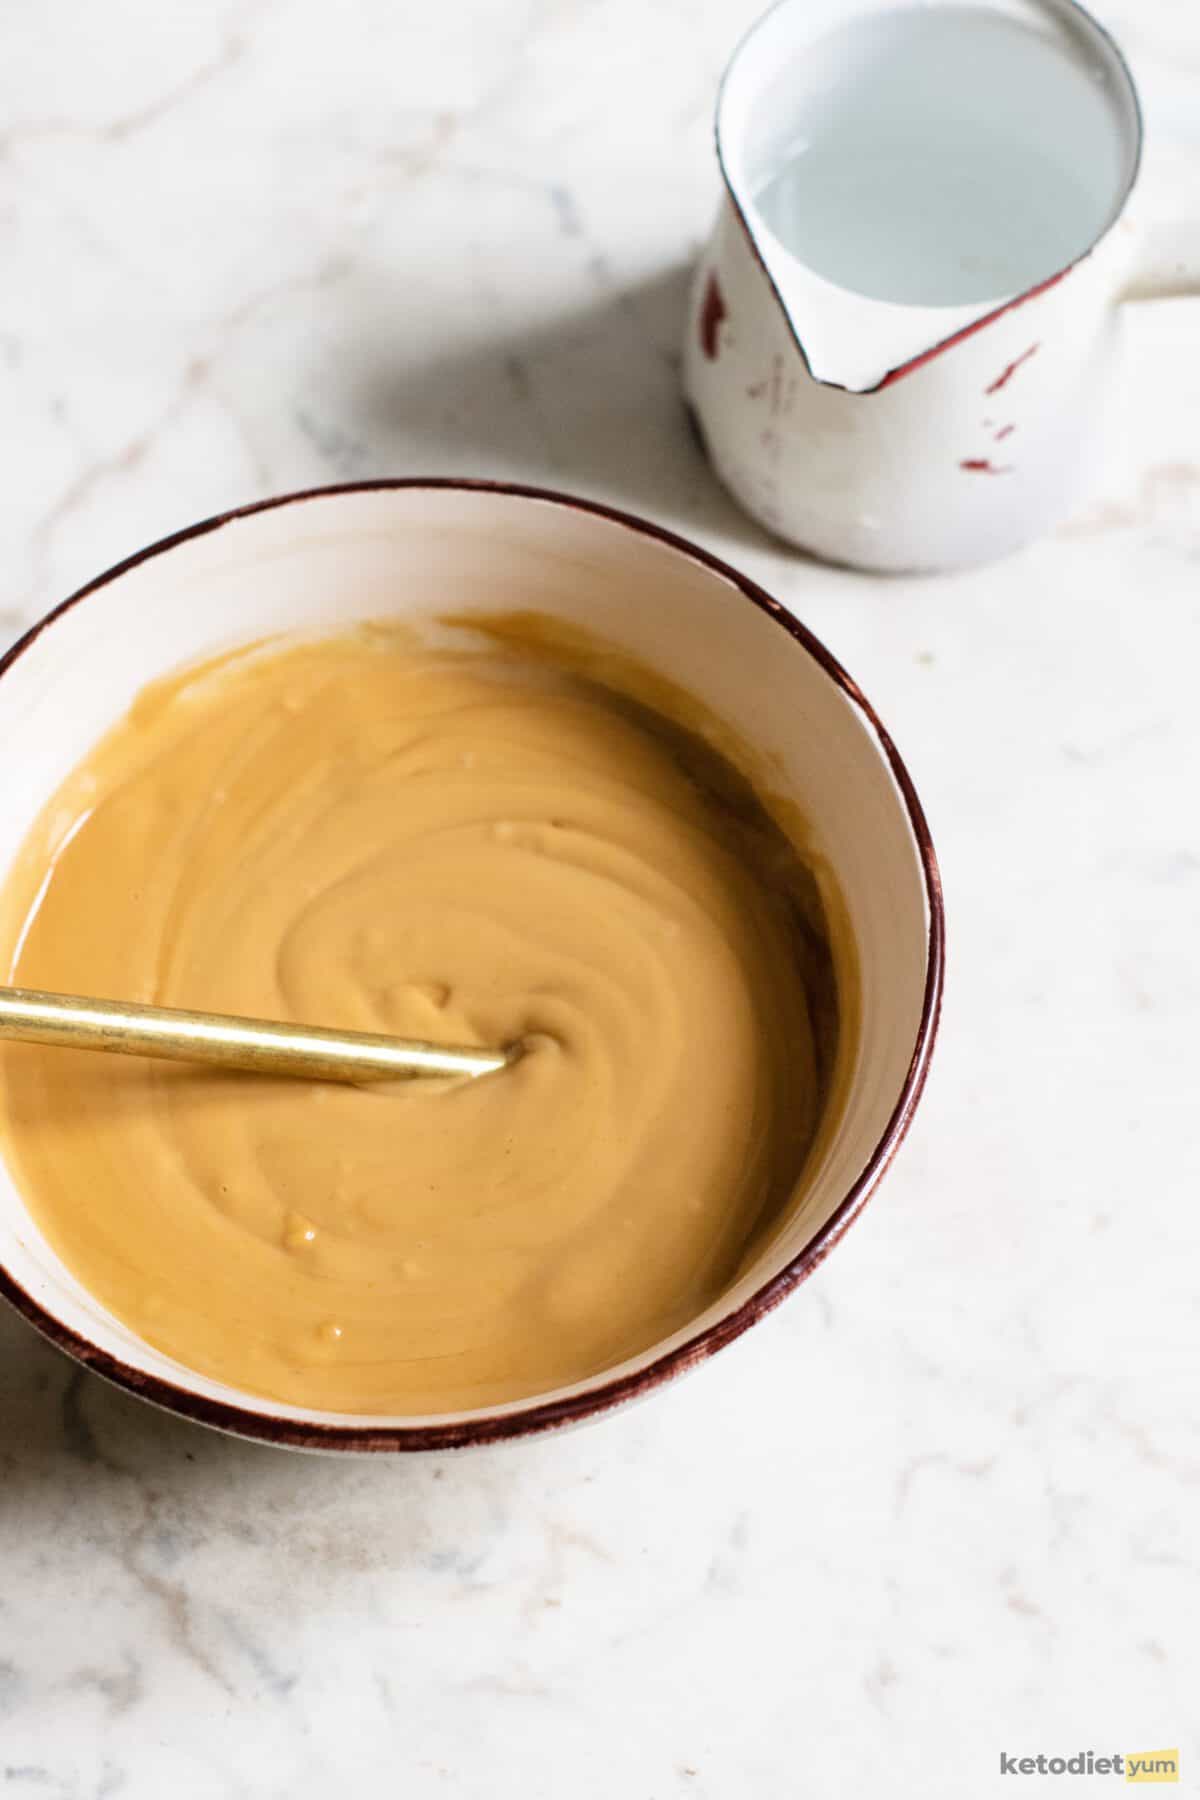 keto peanut sauce - mixing ingredients in a bowl